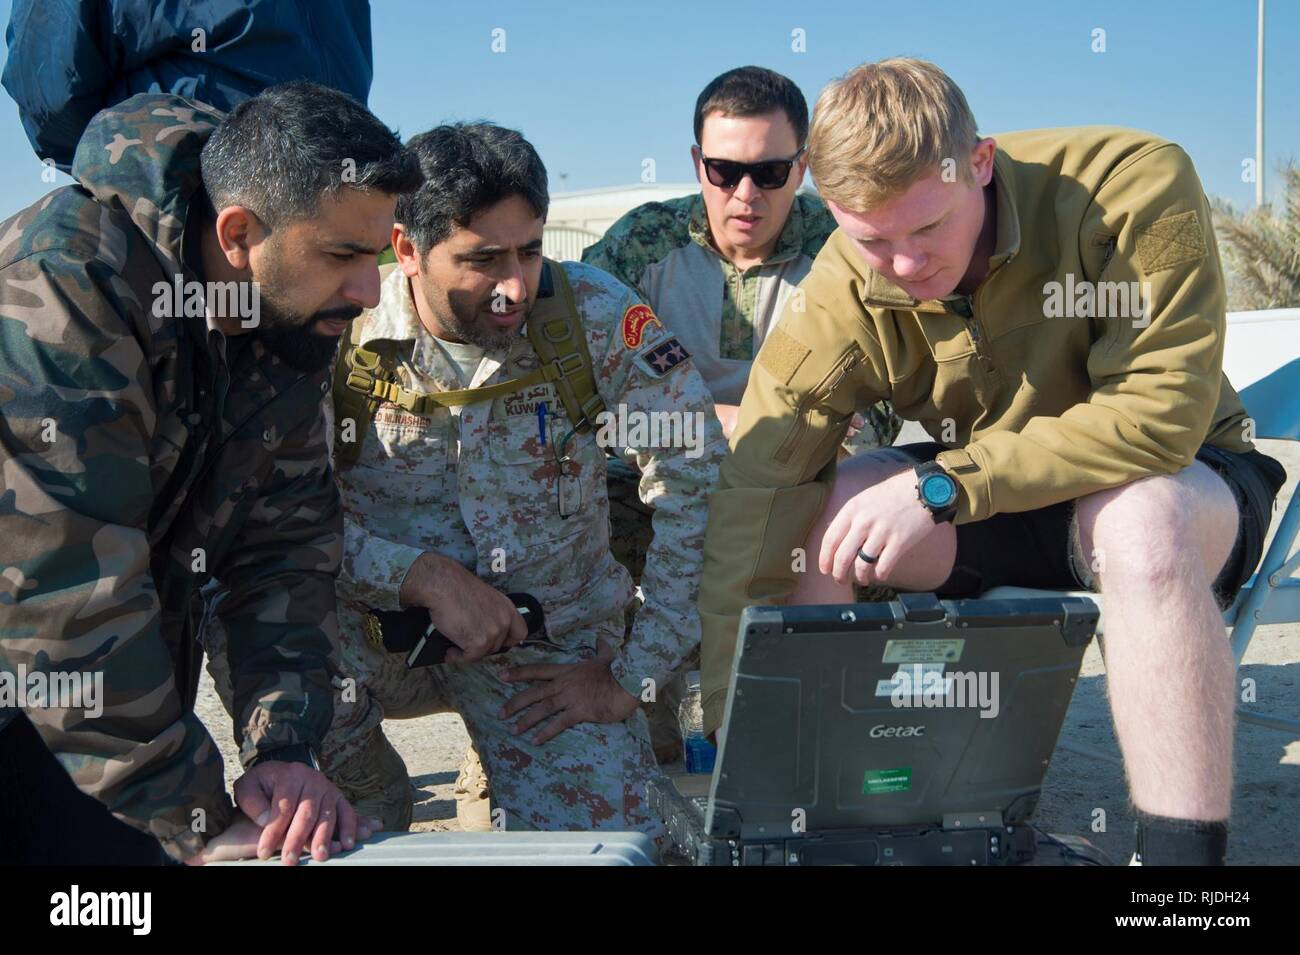 Mohammed Al-Ahmad Naval Base, KUWAIT (Jan. 9, 2018) Mineman 2nd Class Dylan Duncan, assigned to Commander, Task Group 56.1, demonstrates pre-mission checks on an unmanned underwater vehicle to Kuwait Naval Force explosive ordnance disposal technicians during a training evolution as part of exercise Eager Response 18. Eager Response 18 is a bilateral explosive ordnance disposal military exercise between the State of Kuwait and the United States. The exercise fortifies military-to-military relationships between the Kuwait Naval Force and U.S. Navy, advances the operational capabilities of Kuwait Stock Photo